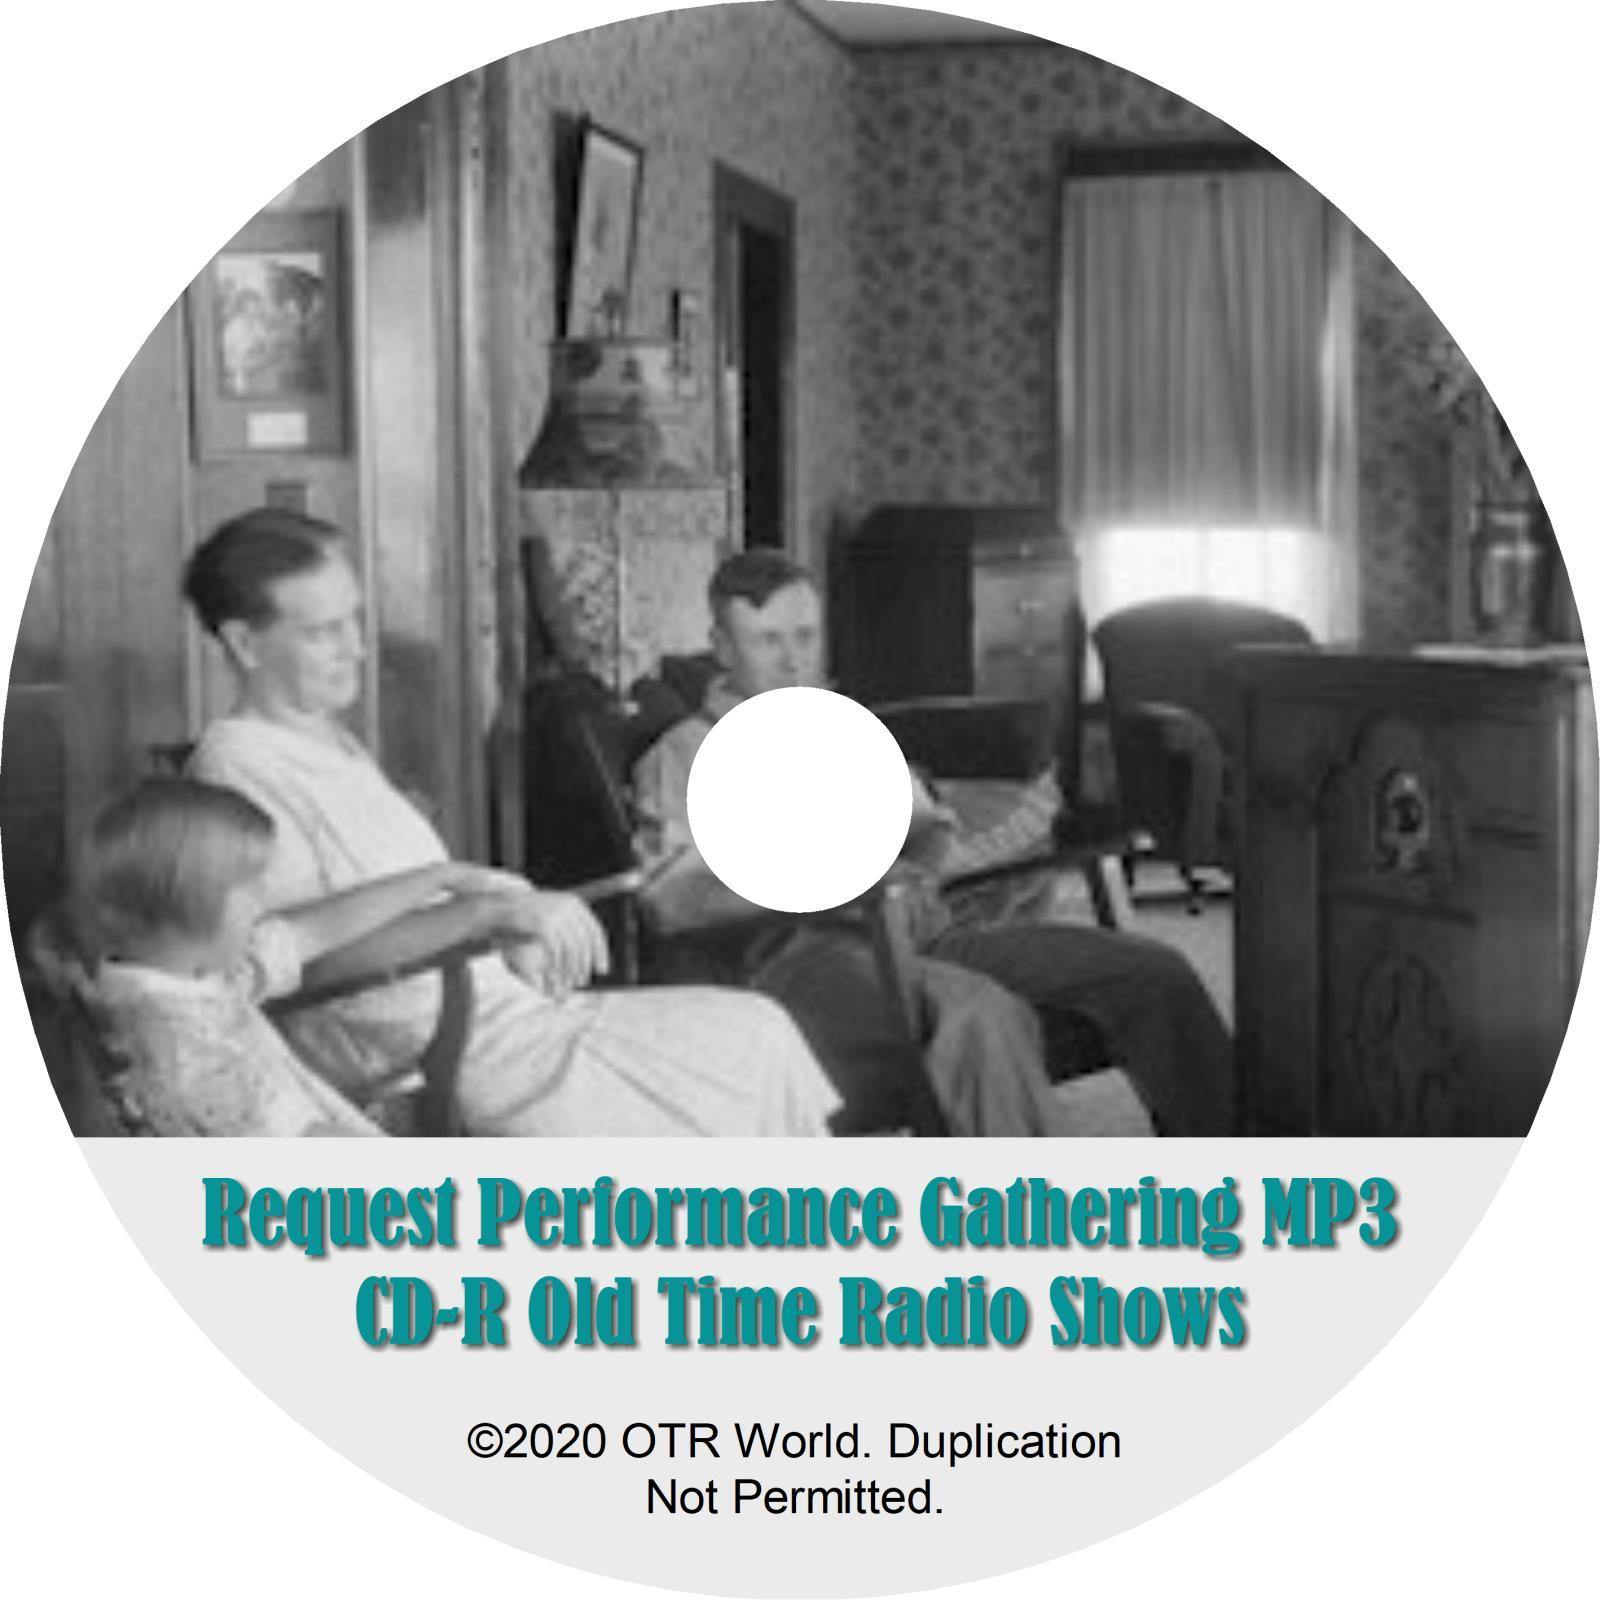 Request Performance OTR OTRS Old Time Radio Shows MP3 On CD-R 6 Episodes - OTR World